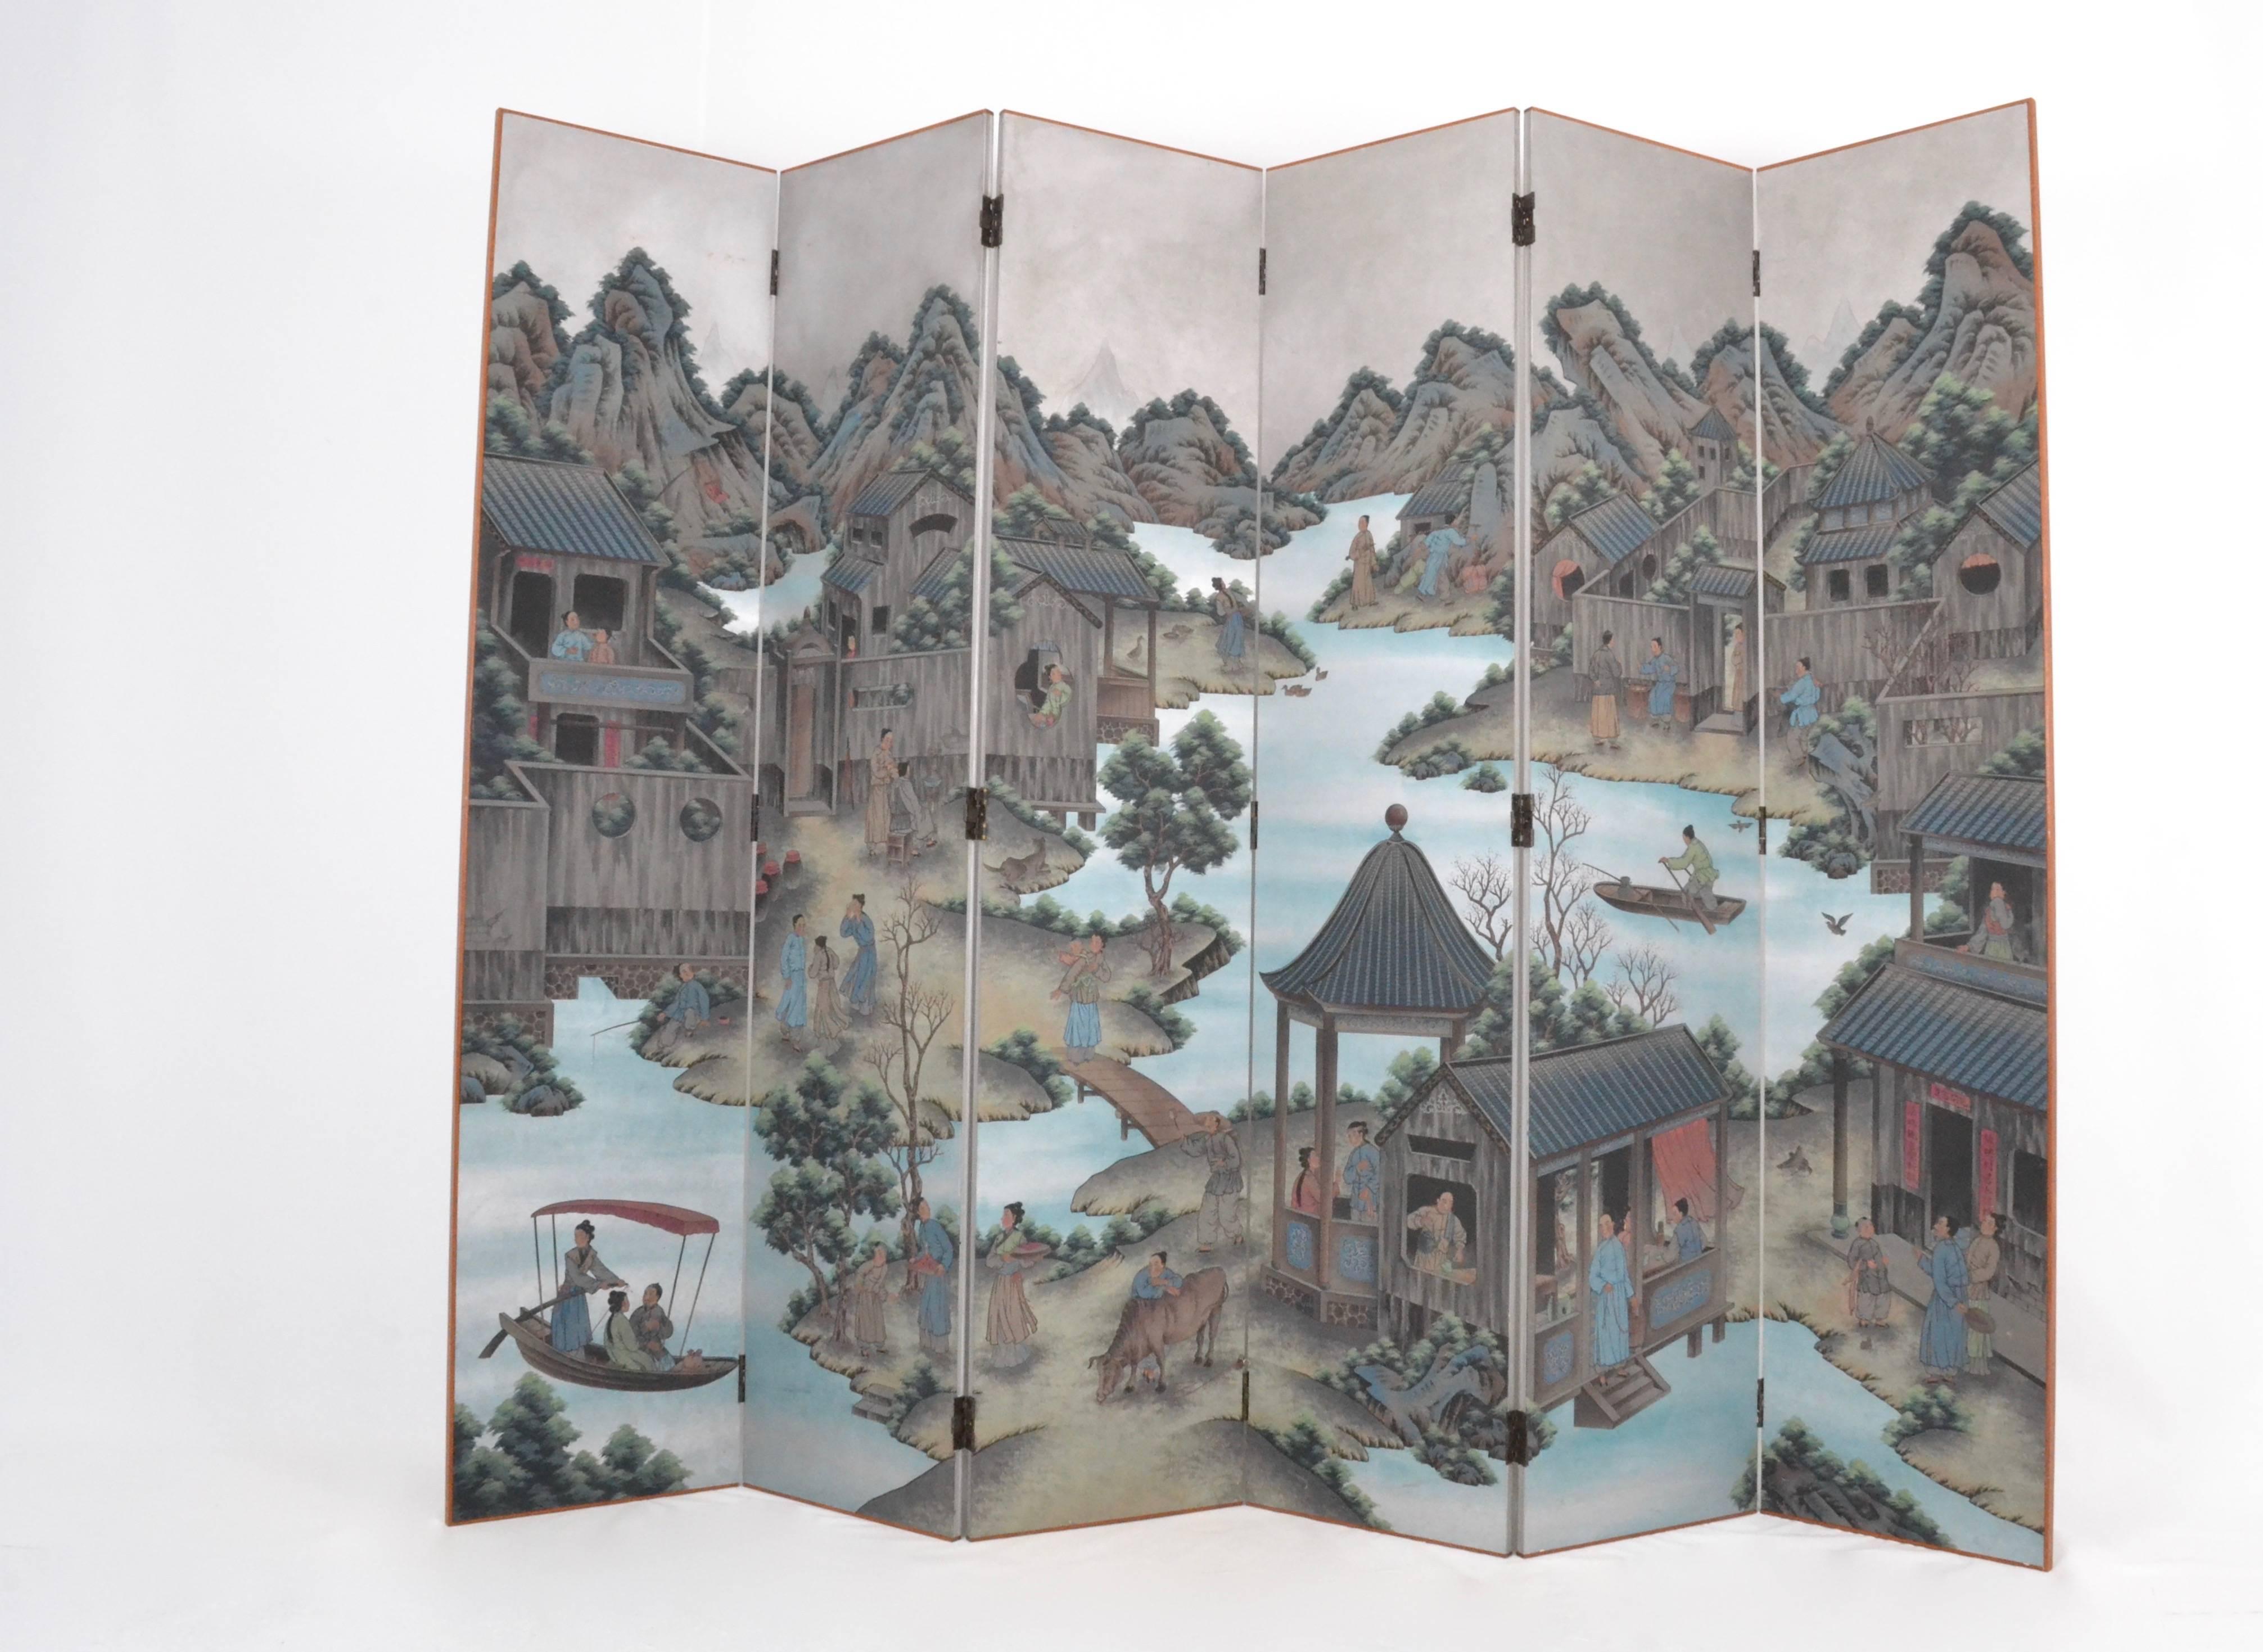 Silvery background sky on a fine hand-painted paper applied to a six panel screen featuring a Japanese waterscape. Lovely colors and striking detail. The back is covered in silver tea paper. Edges are finished with mahogany battens.